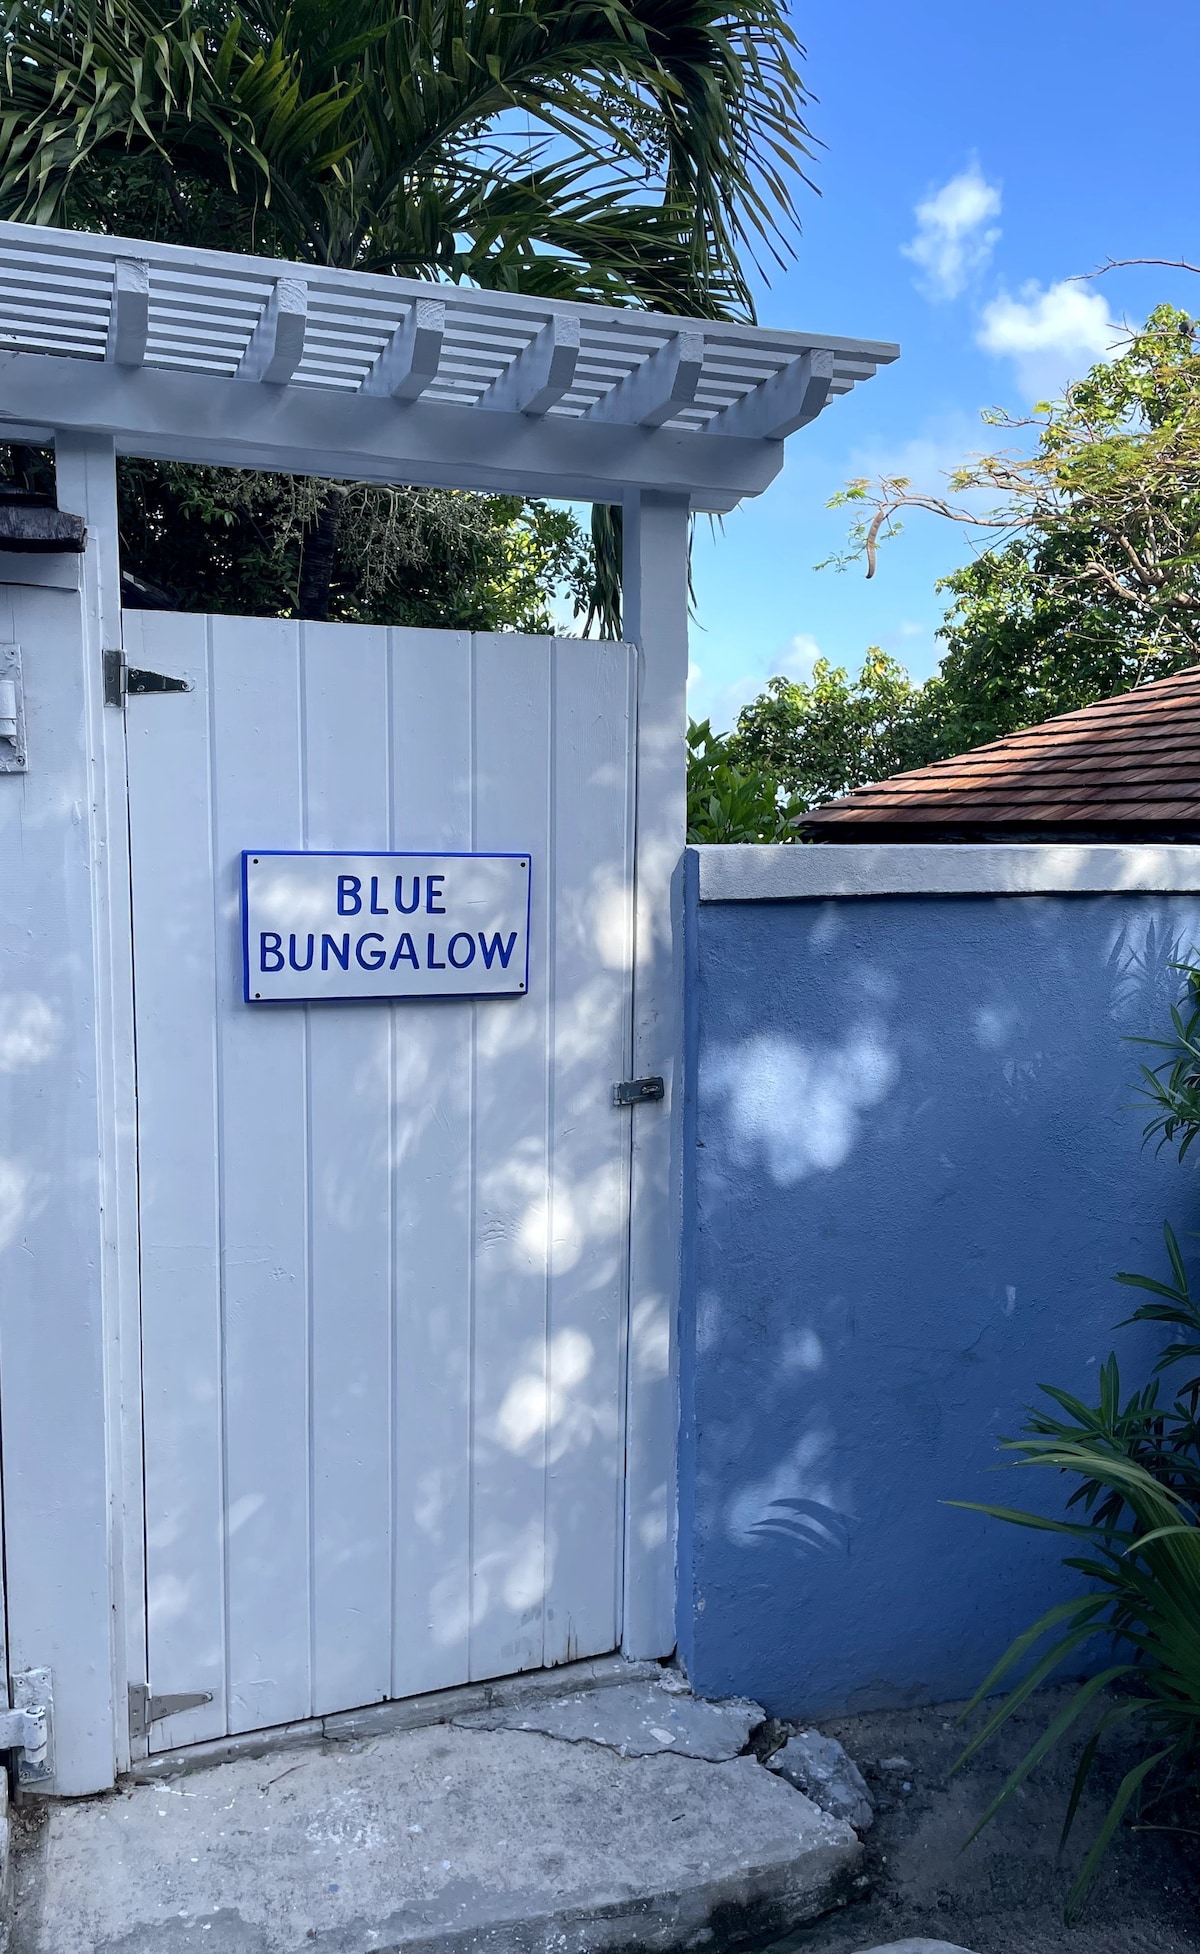 The Blue Bungalow: A cottage on the water!